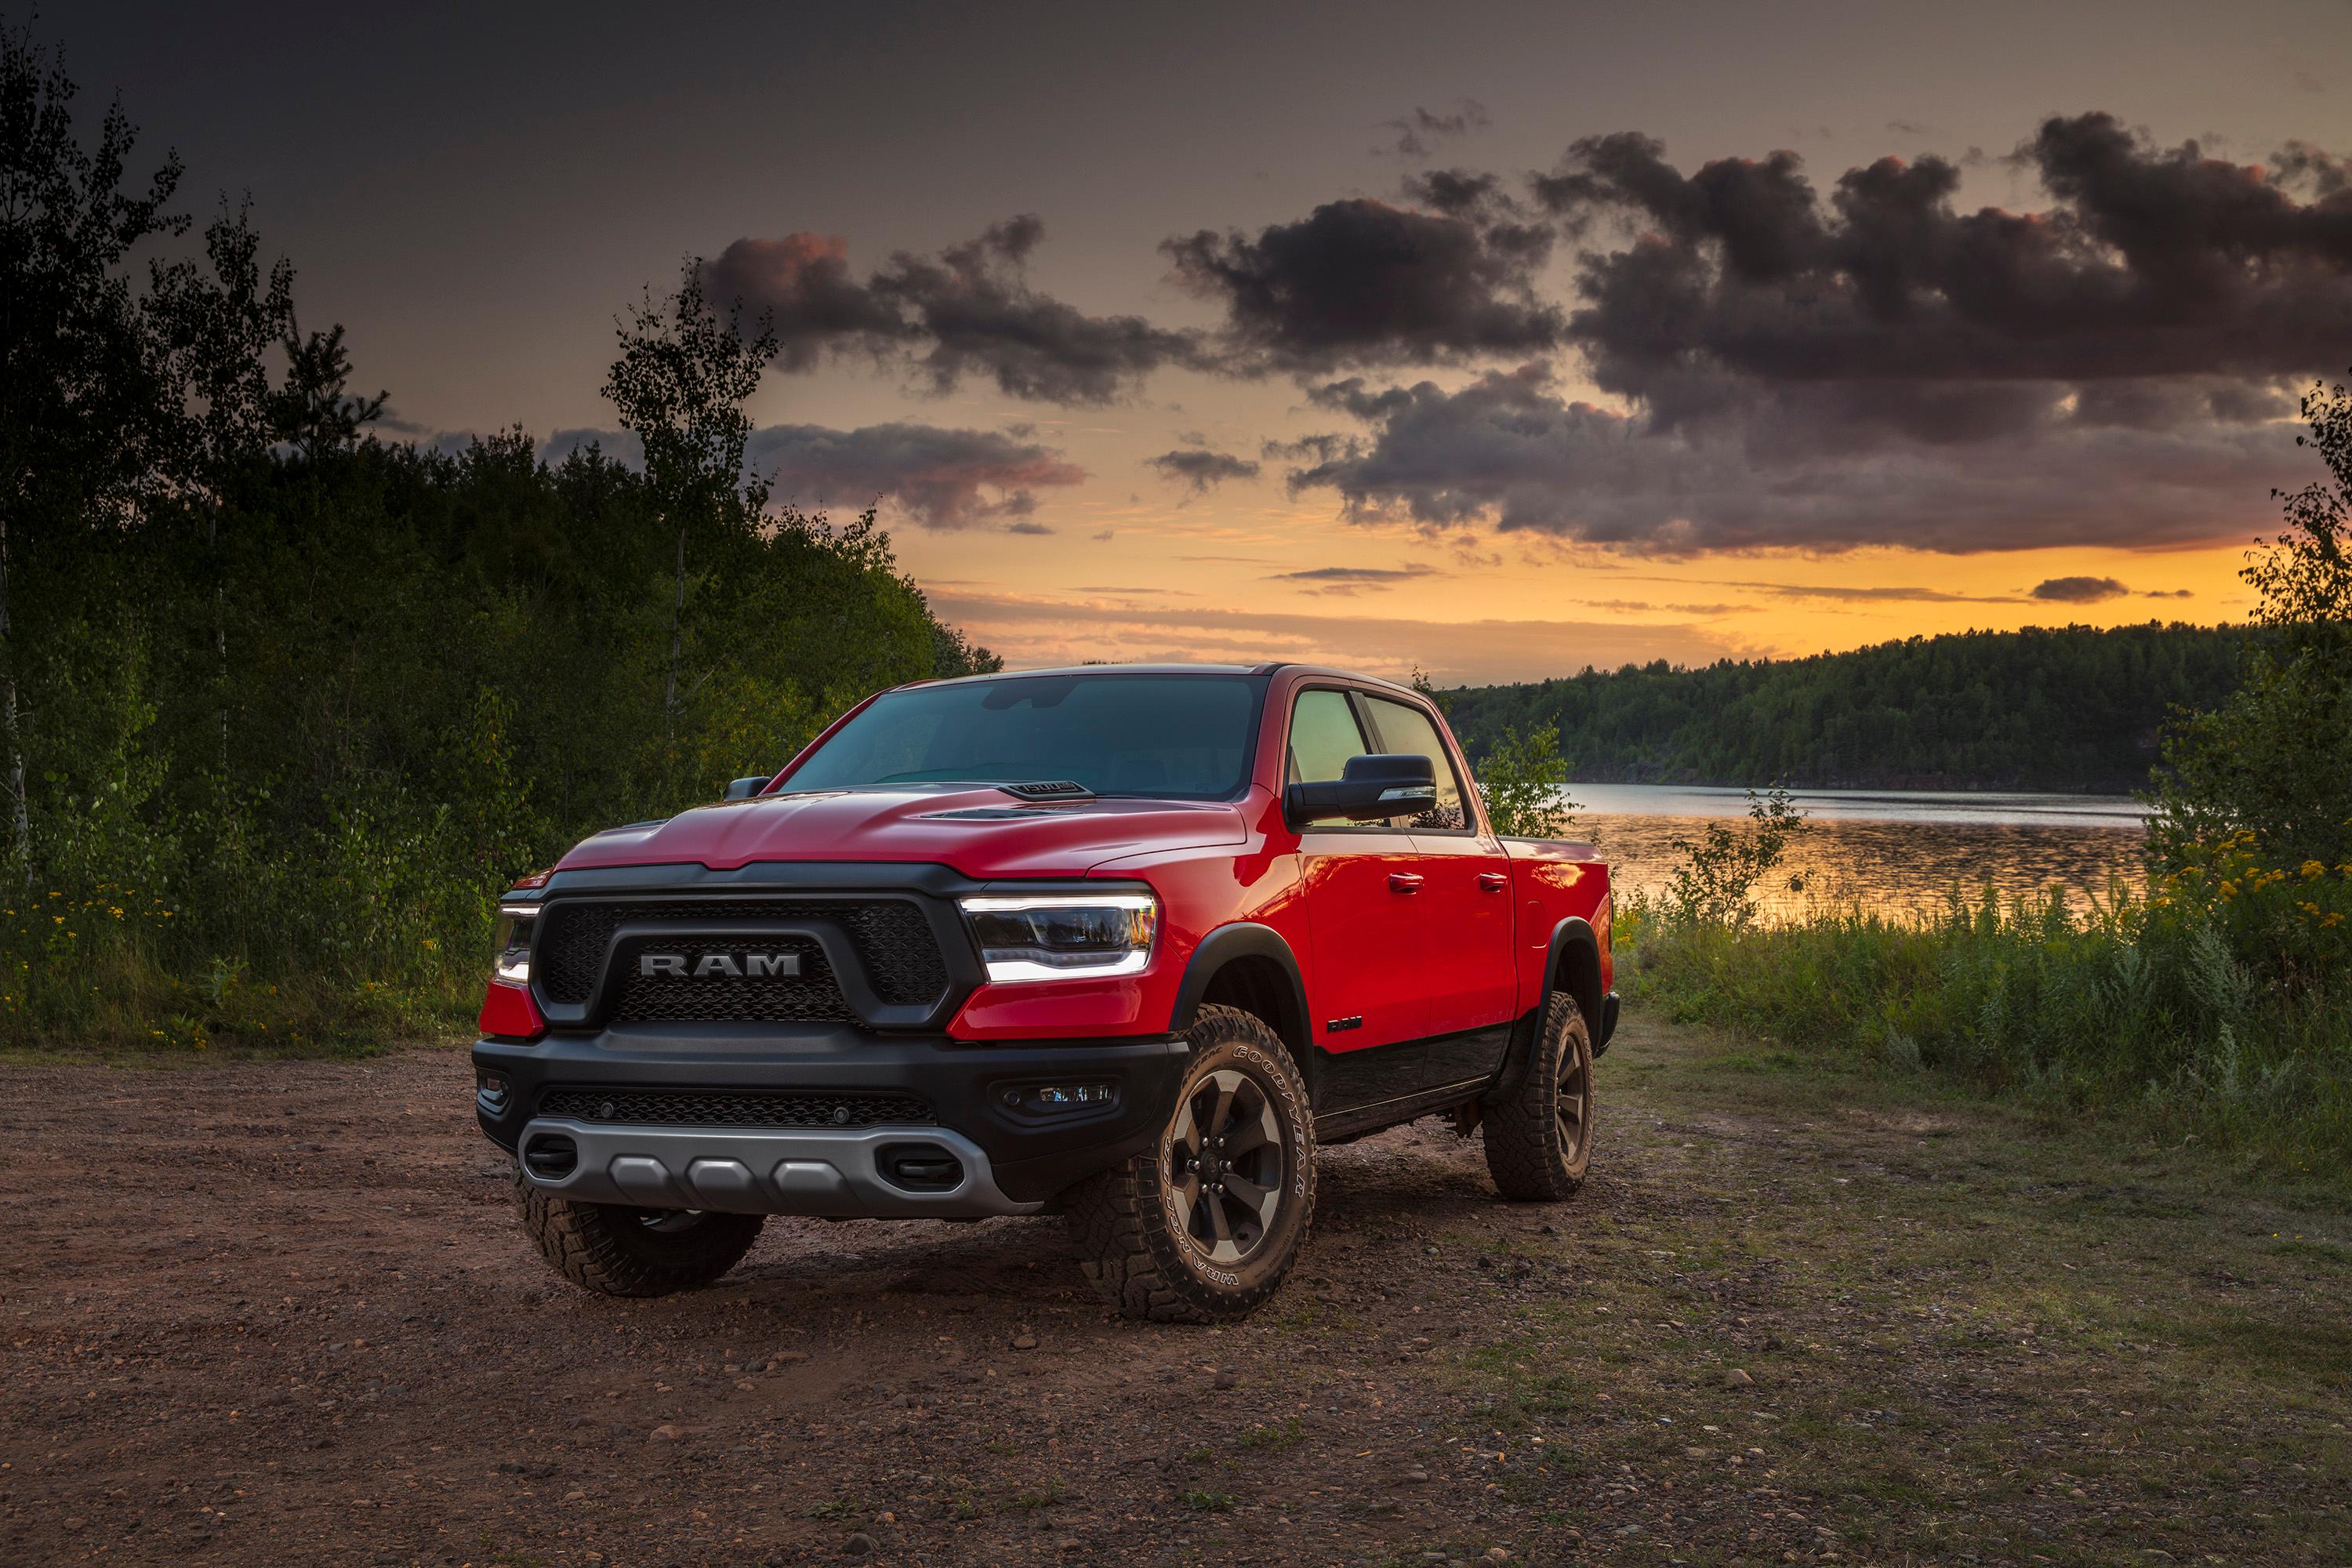 The 2022 Ram 1500 is receiving praise from basically everyone who reviews it.